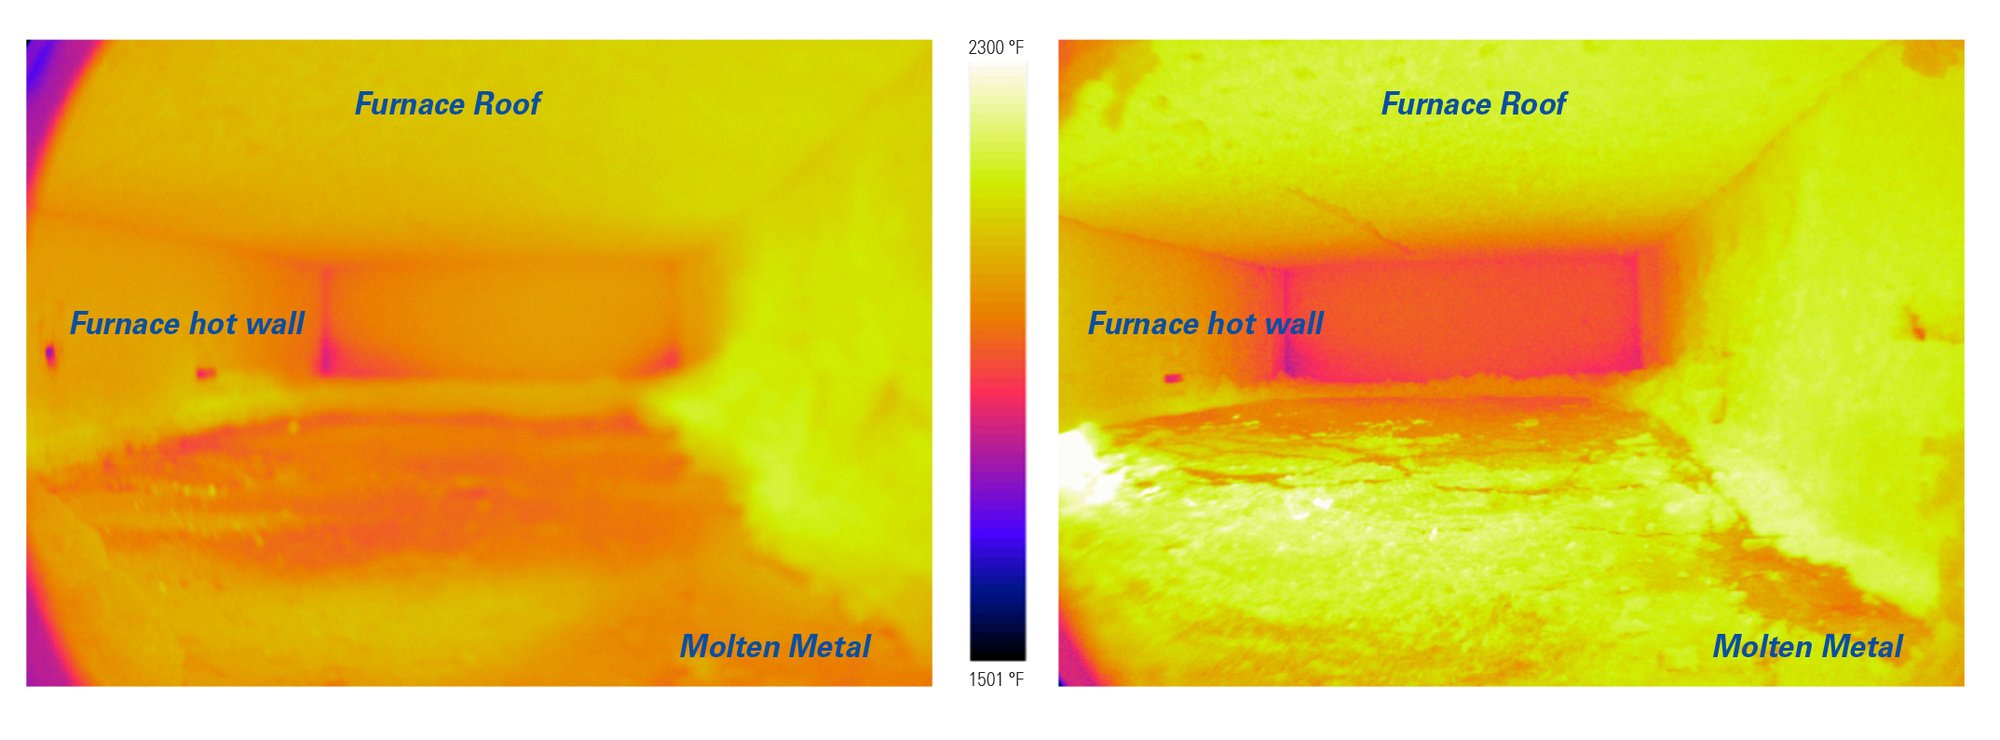 oxyfuel combustion thermal imaging